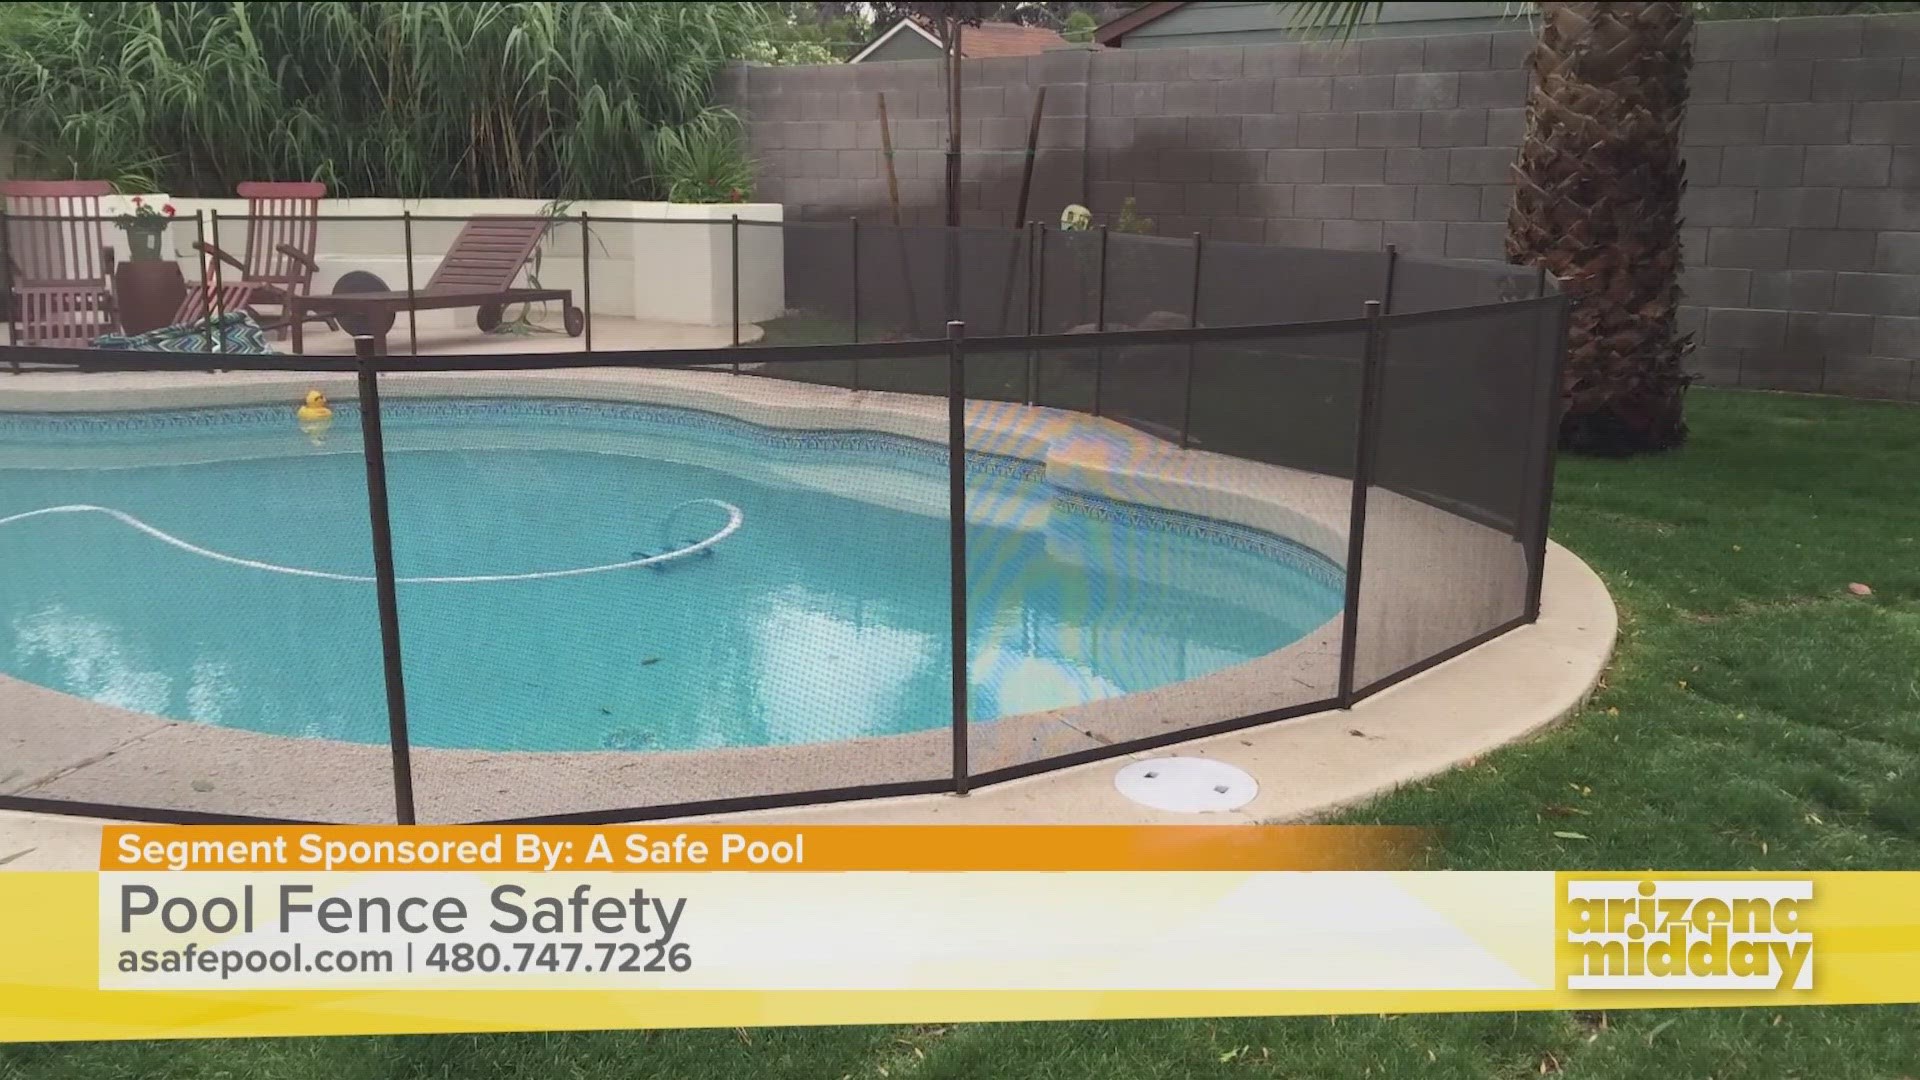 Jason Howard, President of A Safe Pool, tells us the best way to prevent drownings and how important safety barriers are.